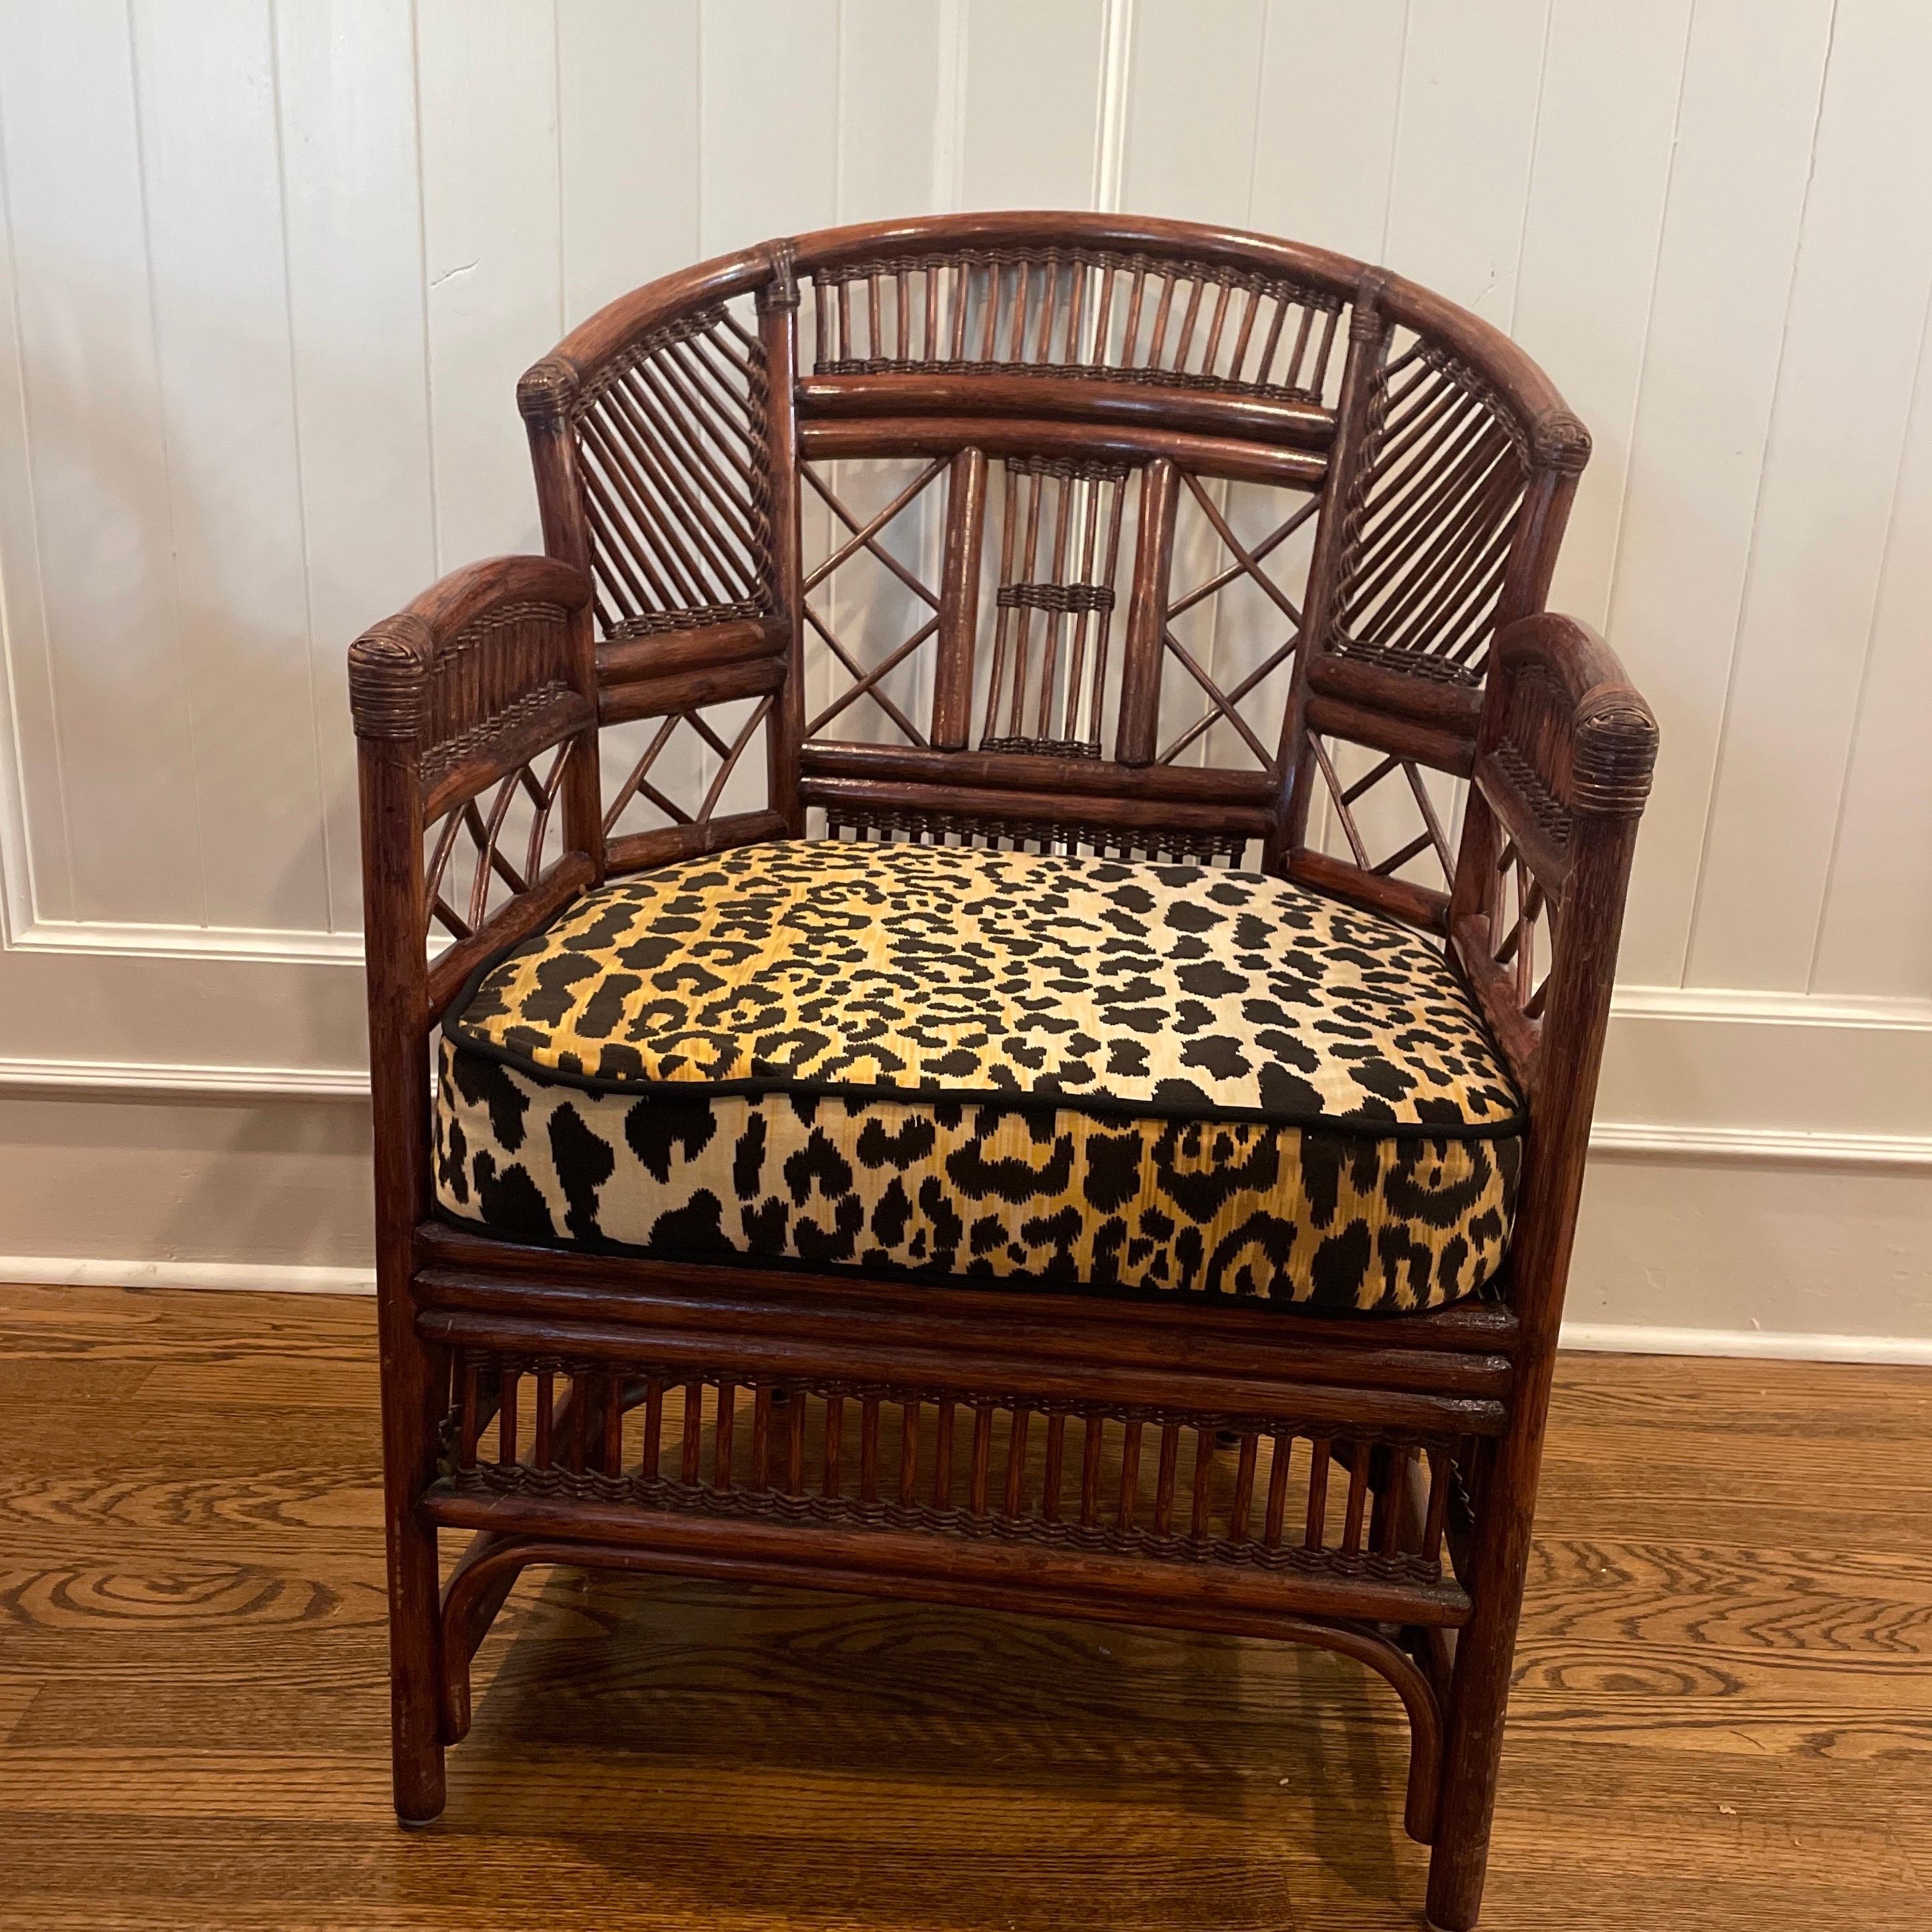 Chippendale Vintage Brighton Style Chairs With Custom Leopard Print Cushions- Pair